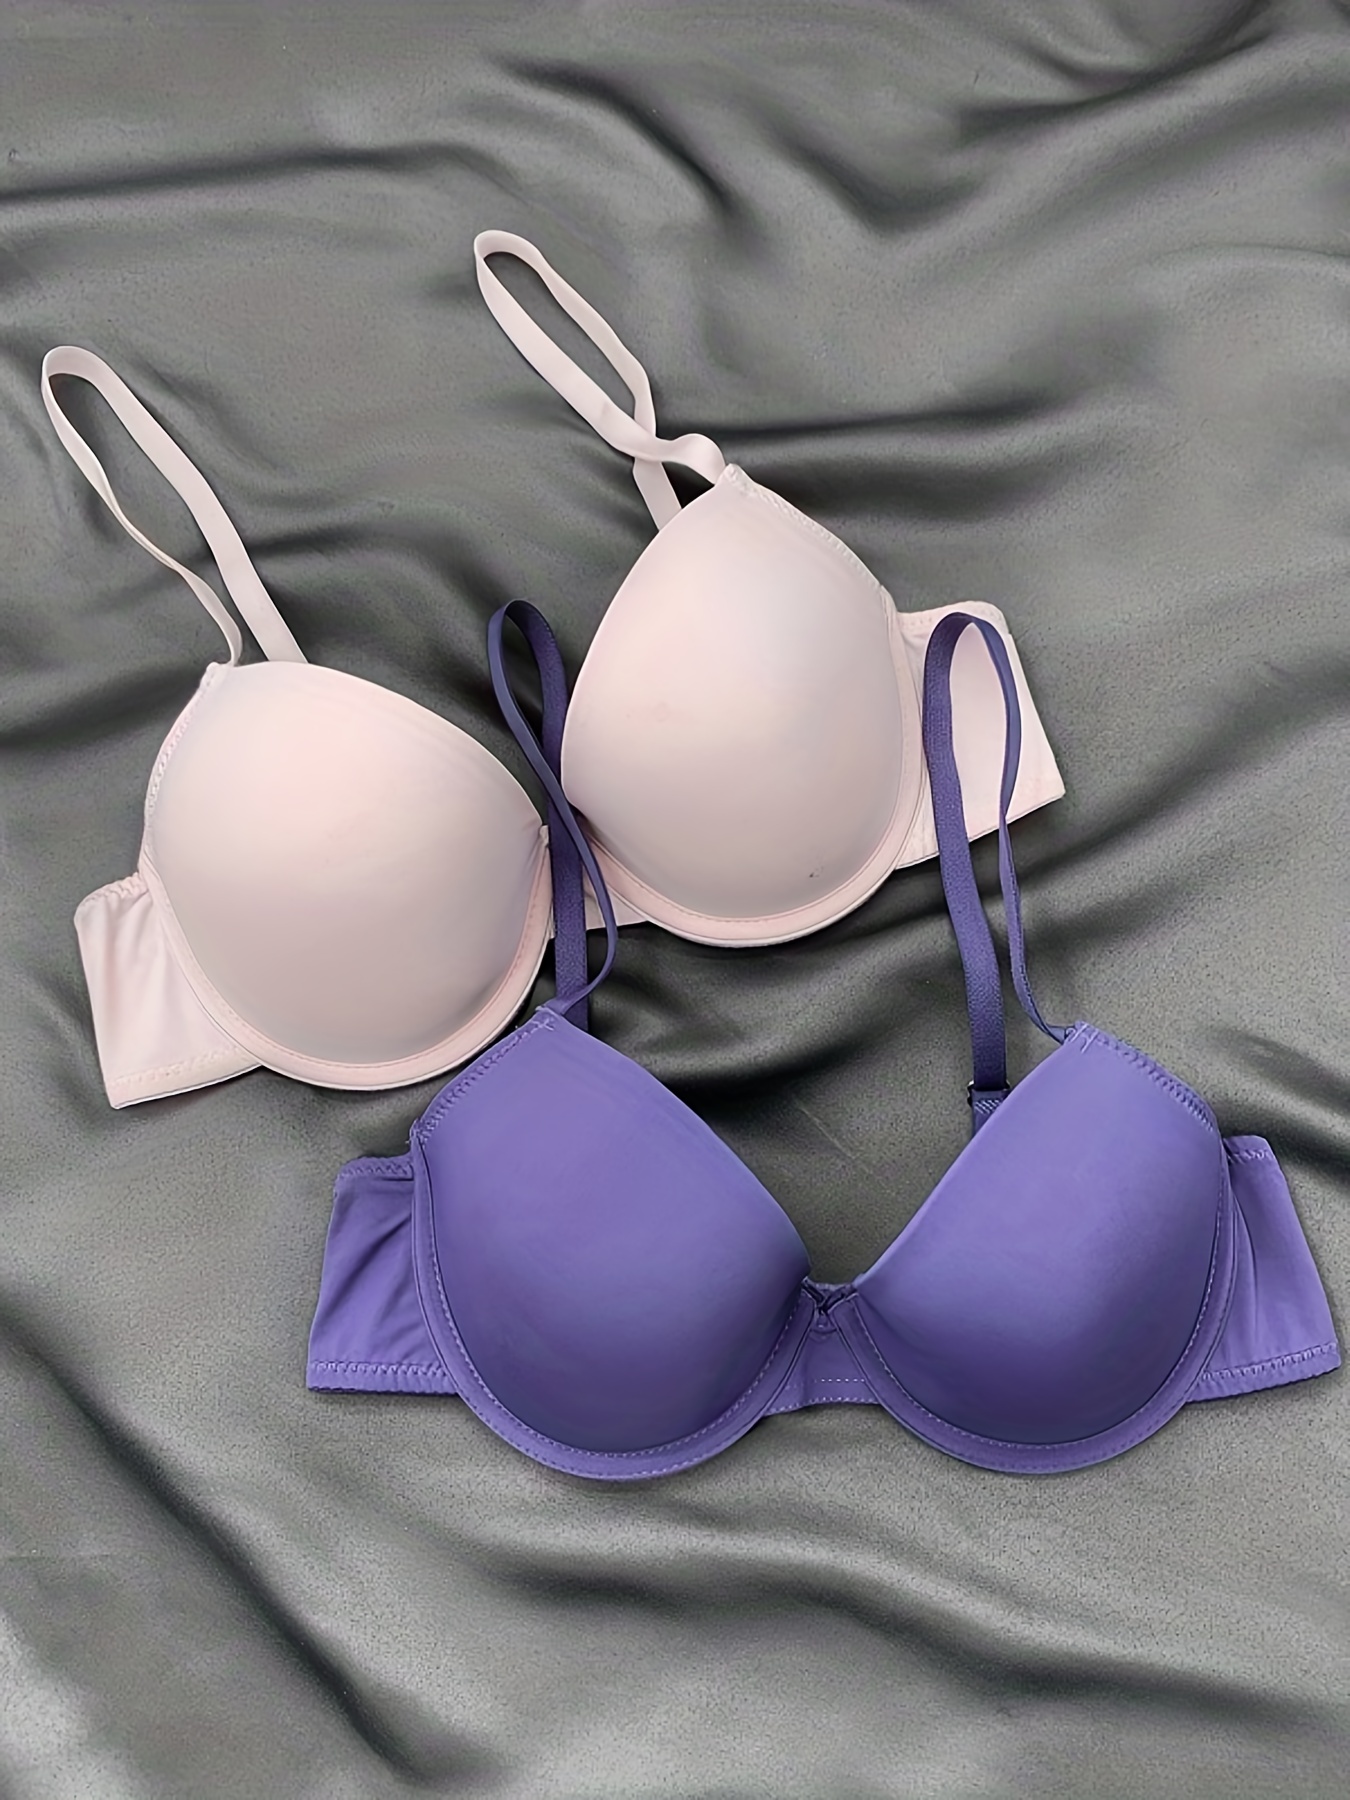 2pcs Comfy Glossy Everyday Bras, Smooth Push Up T-shirt Intimates Bras,  Women's Lingerie & Underwear